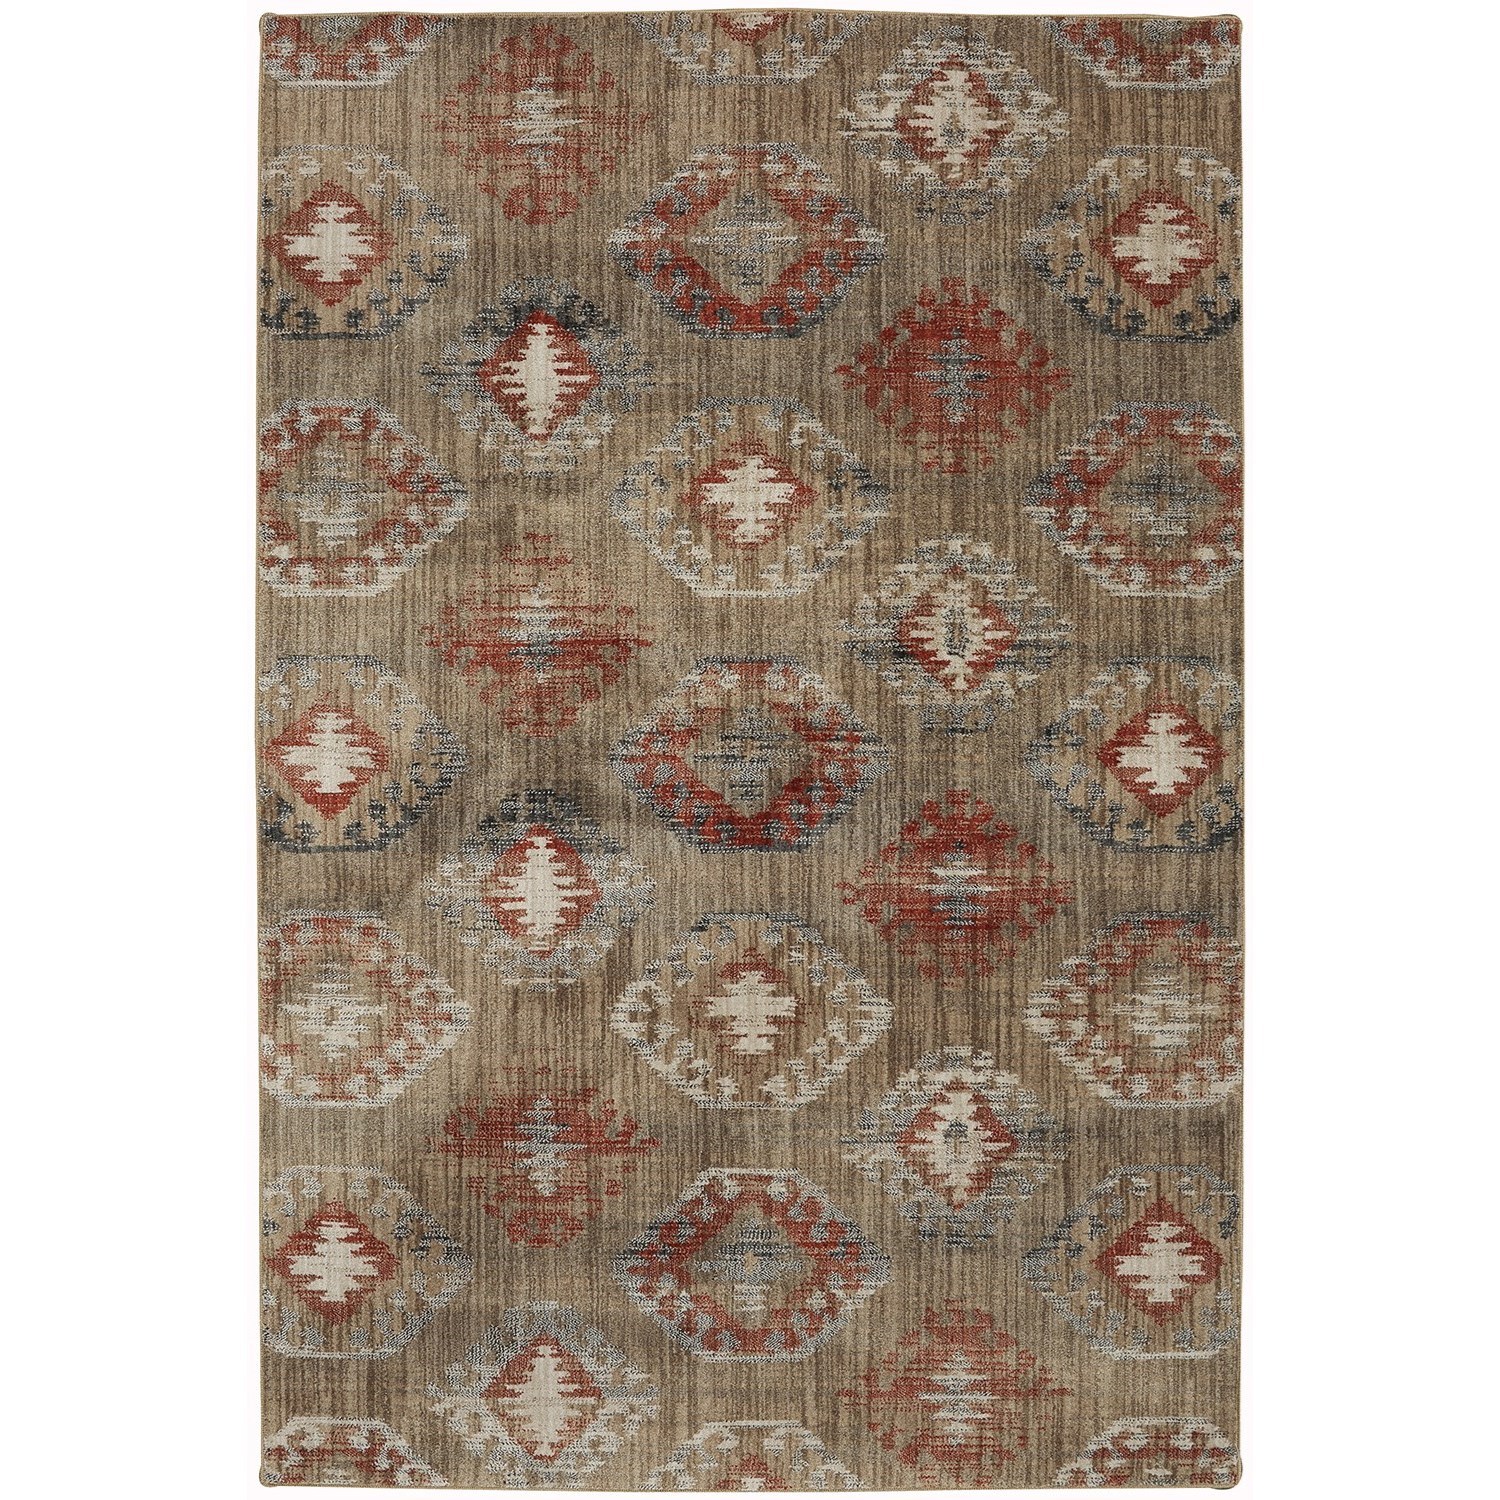 8'x11' Ion Ginger Area Rug